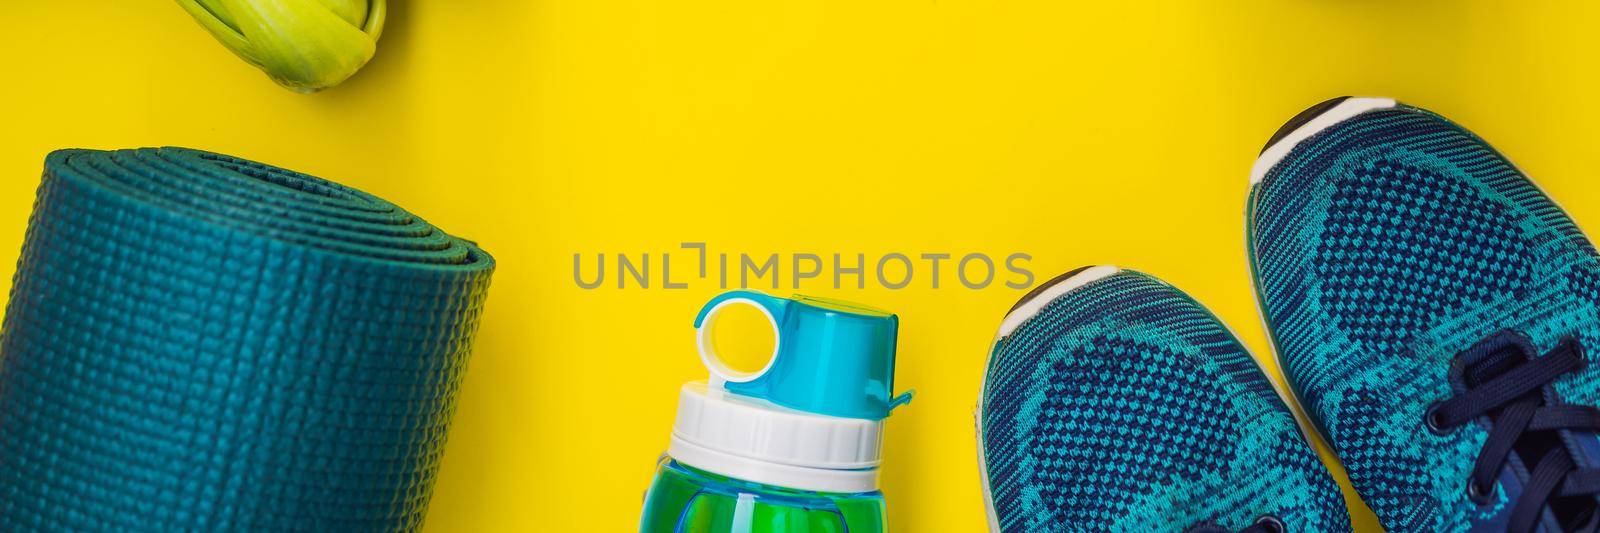 BANNER, LONG FORMAT Everything for sports turquoise, blue shades on a yellow background and spinach smoothies. Yoga mat, sport shoes sportswear and bottle of water. Concept healthy lifestyle, sport and diet. Sport equipment. Copy space.